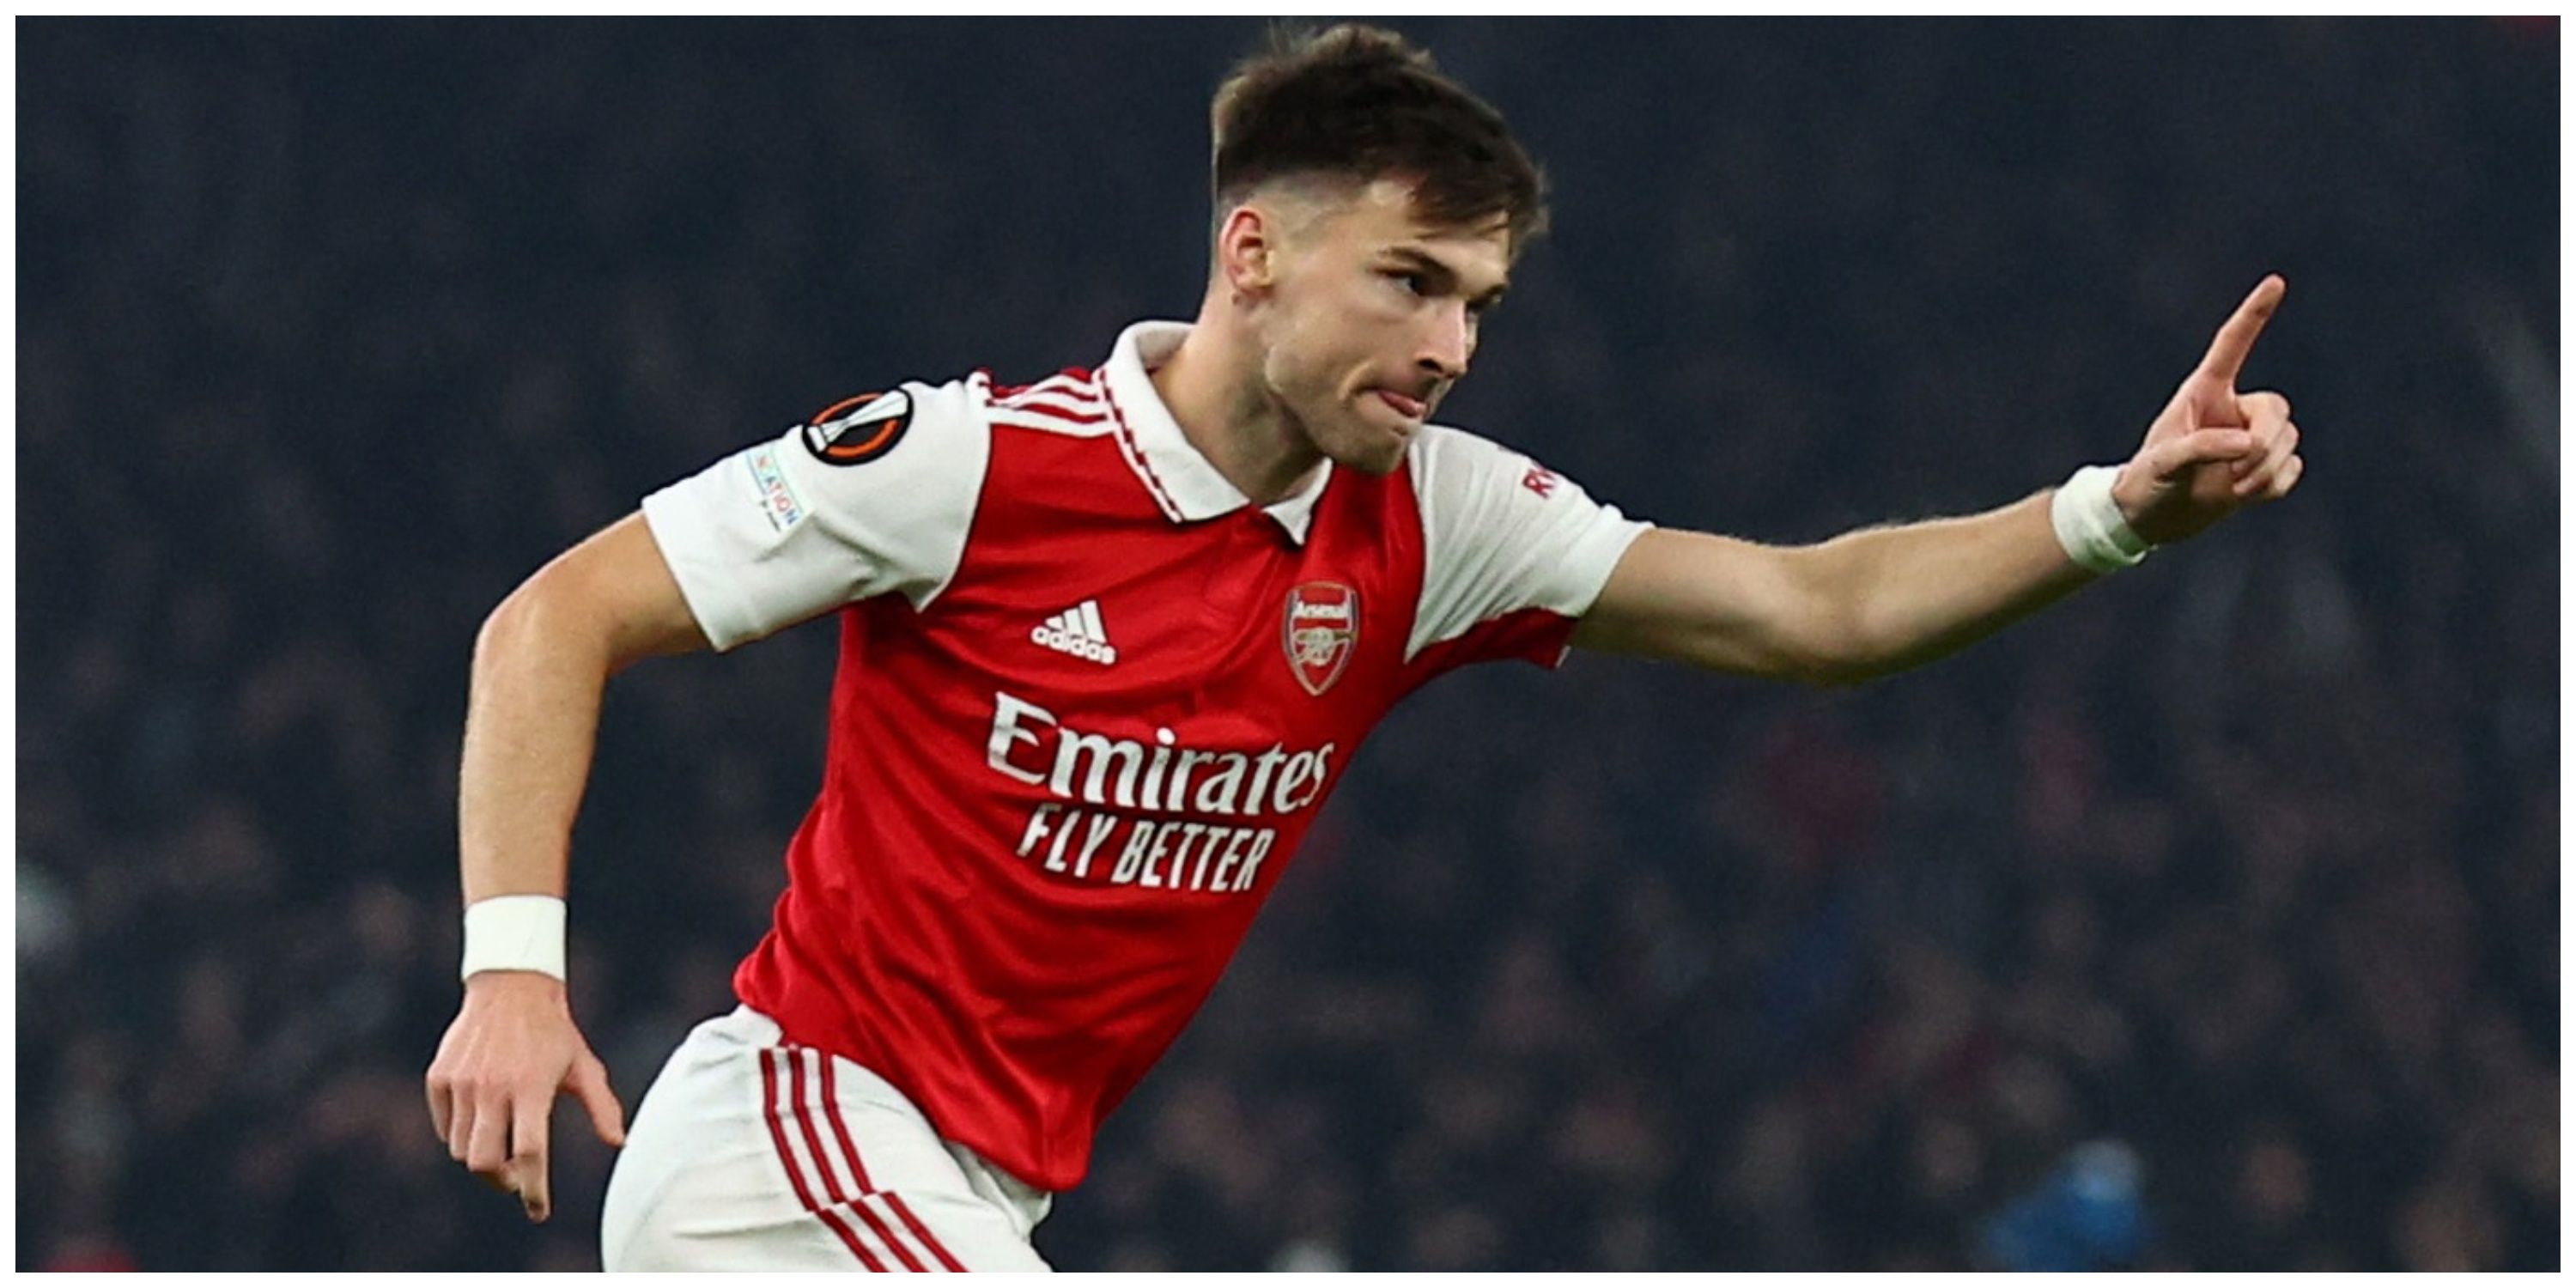 Kieran Tierney now ‘one step closer’ to big moment at the Emirates